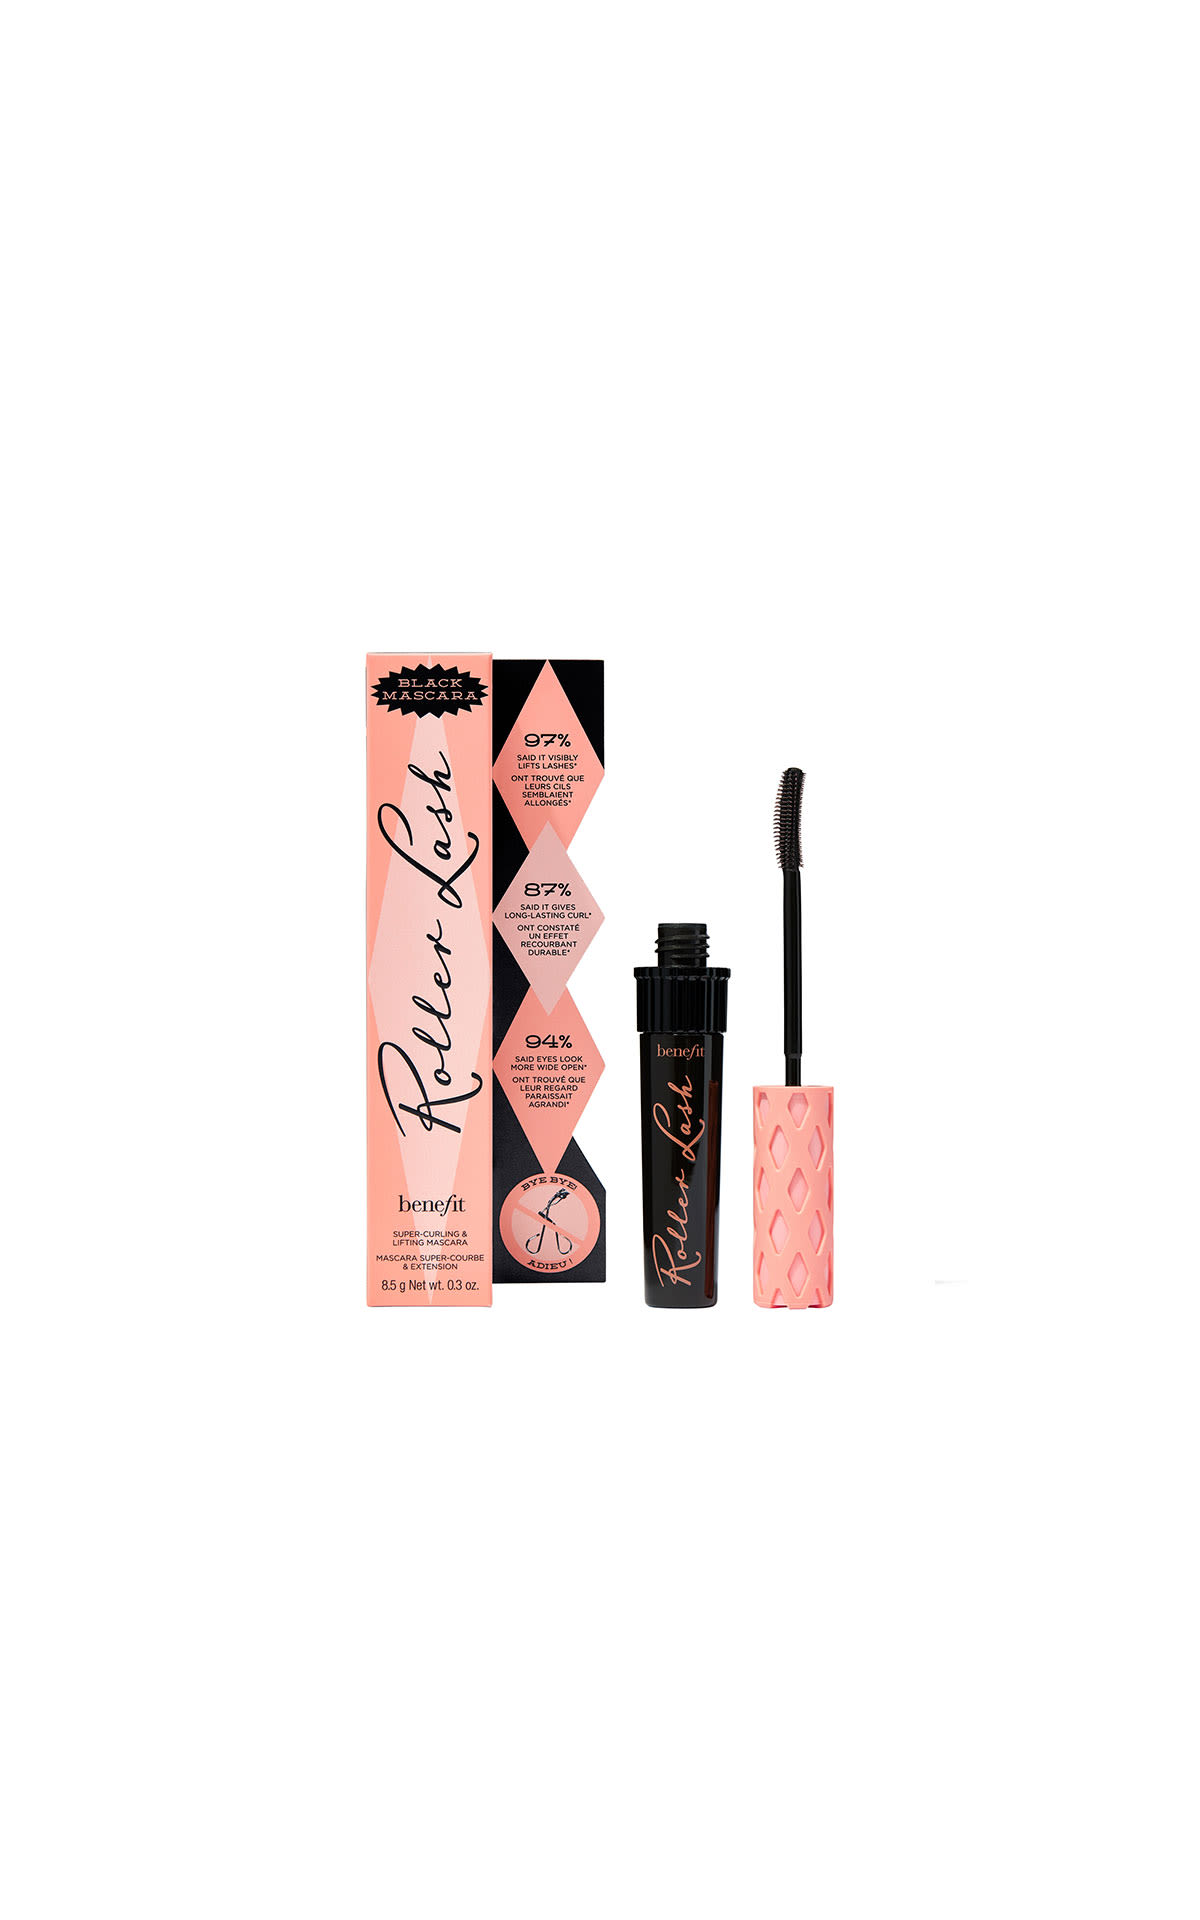 Benefit Cosmetics Roller lash  from Bicester Village